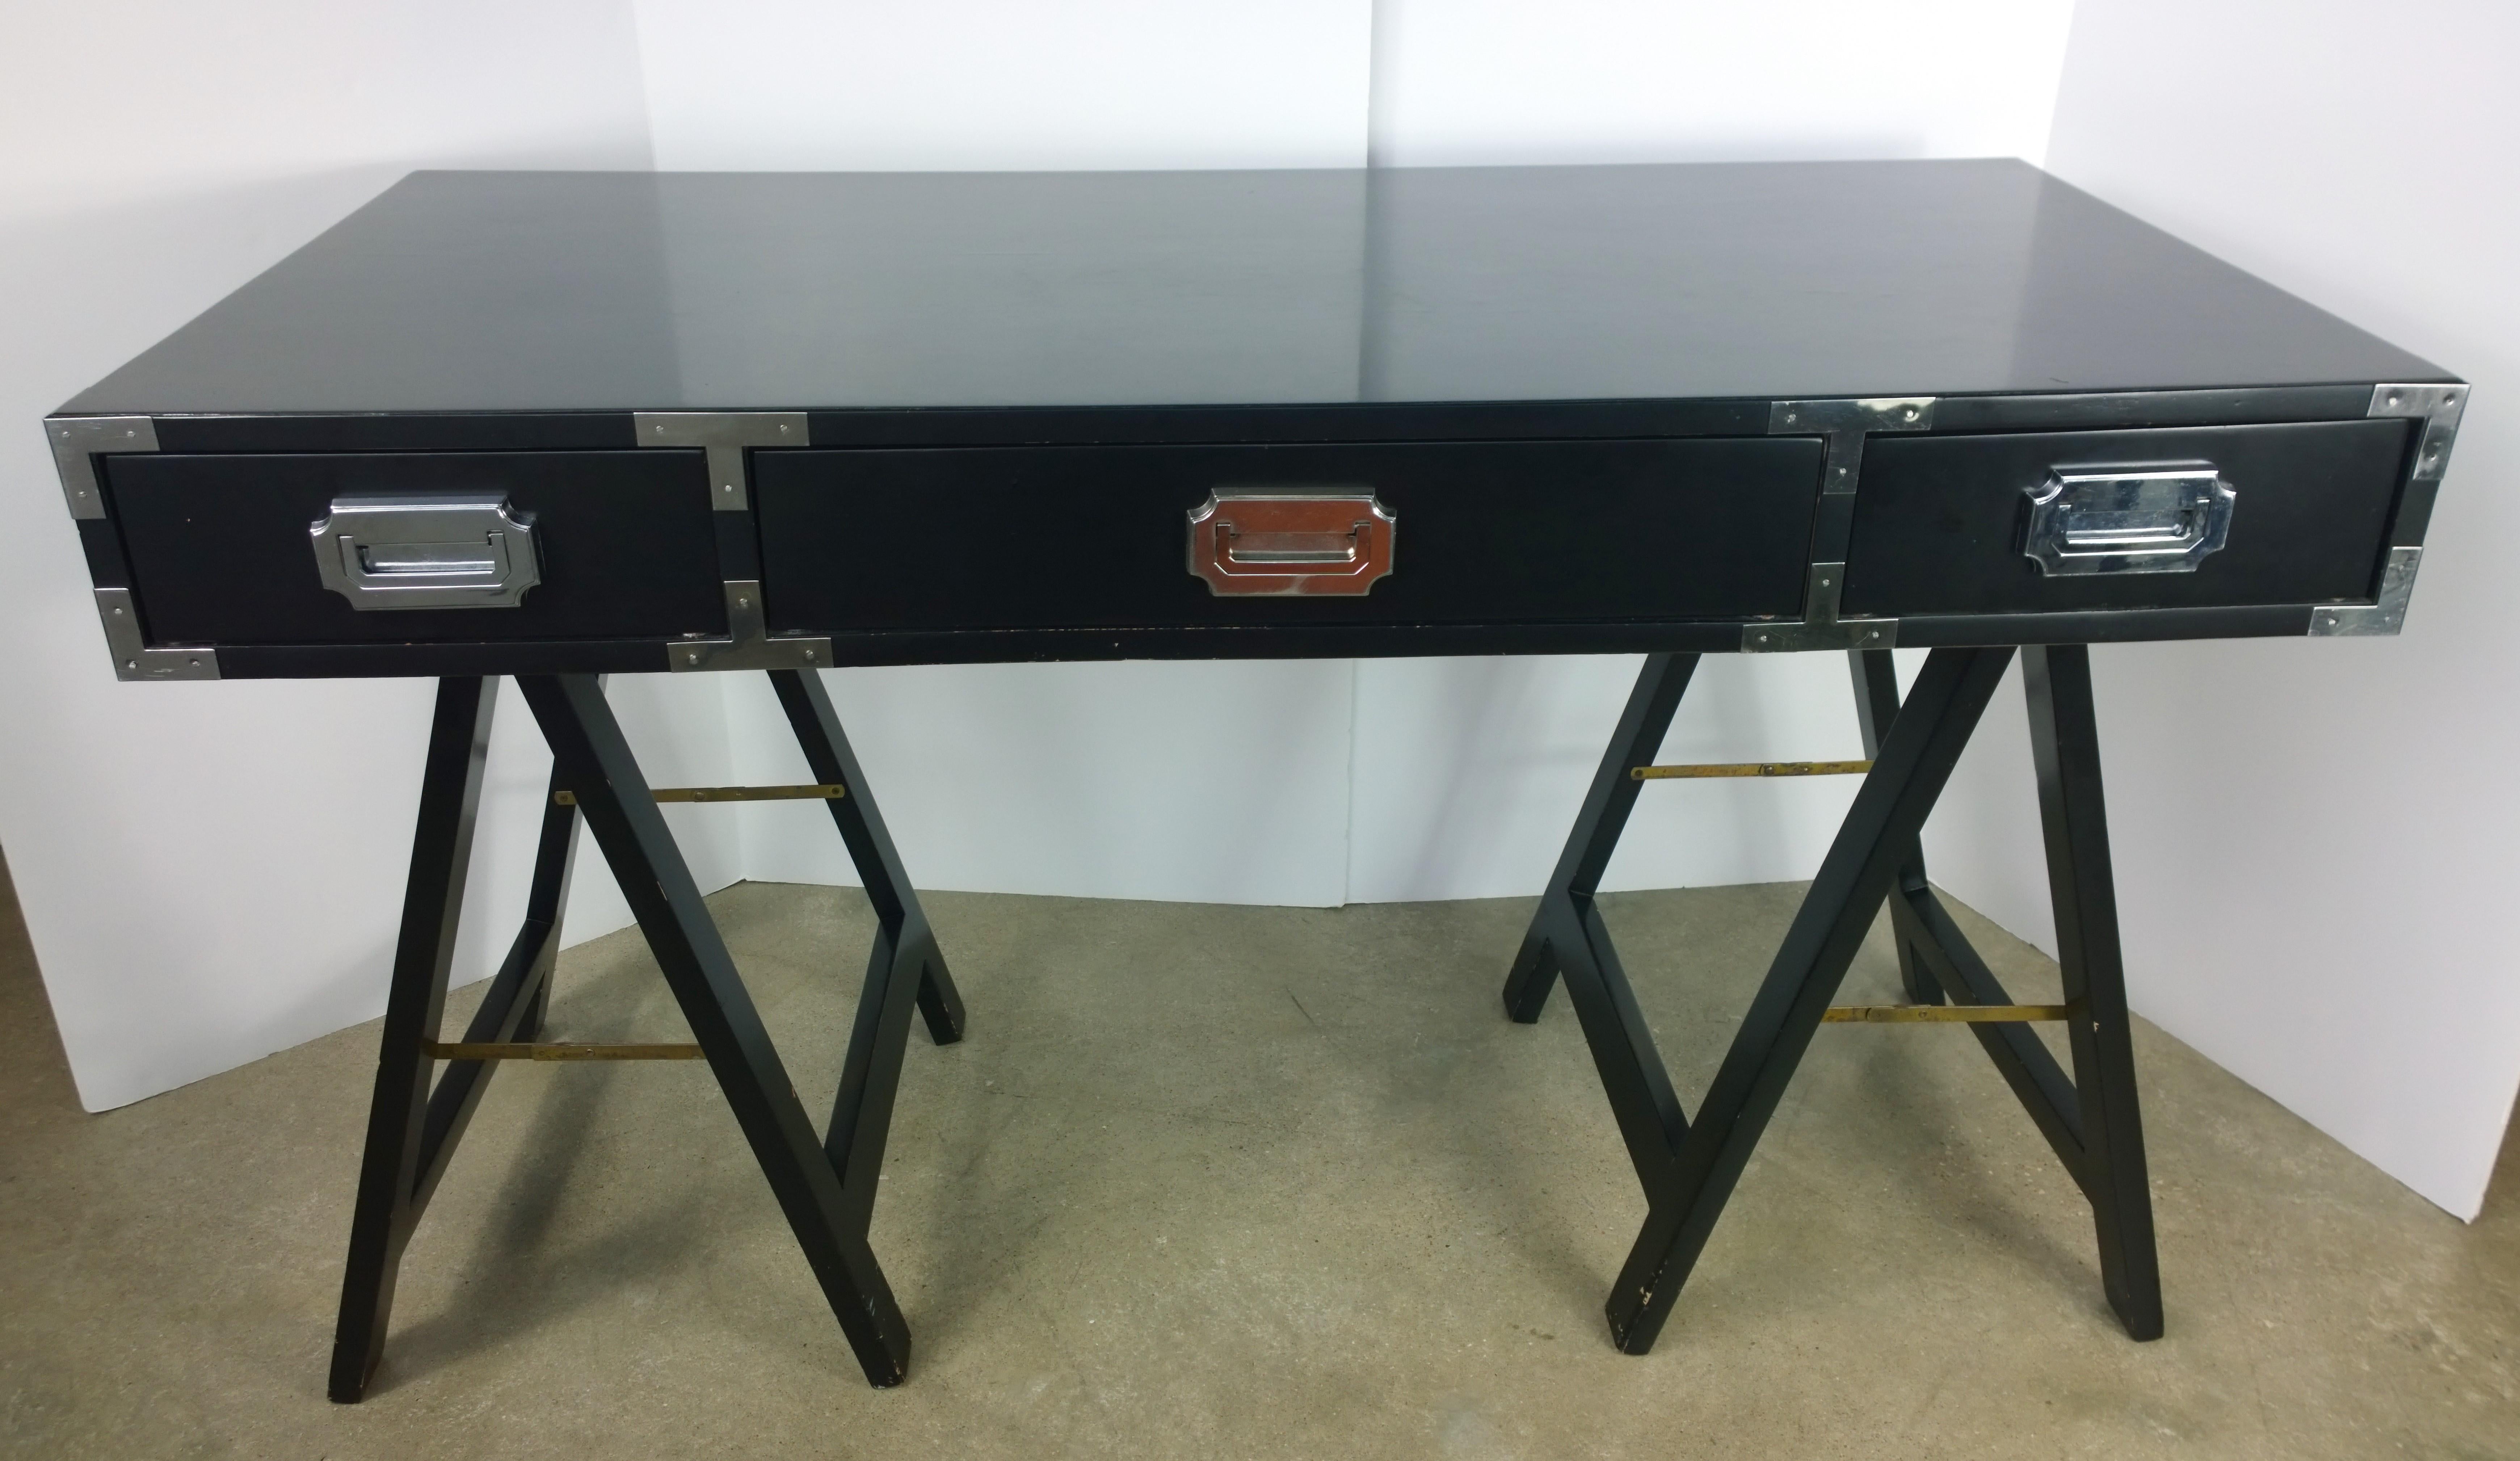 Offered is a Mid-Century Modern lacquered in black, three-drawer Campaign style desk or writing table with chrome and brass accents. The black lacquered Campaign desk with chrome pulls has special grooves that enables the top to sit securely upon